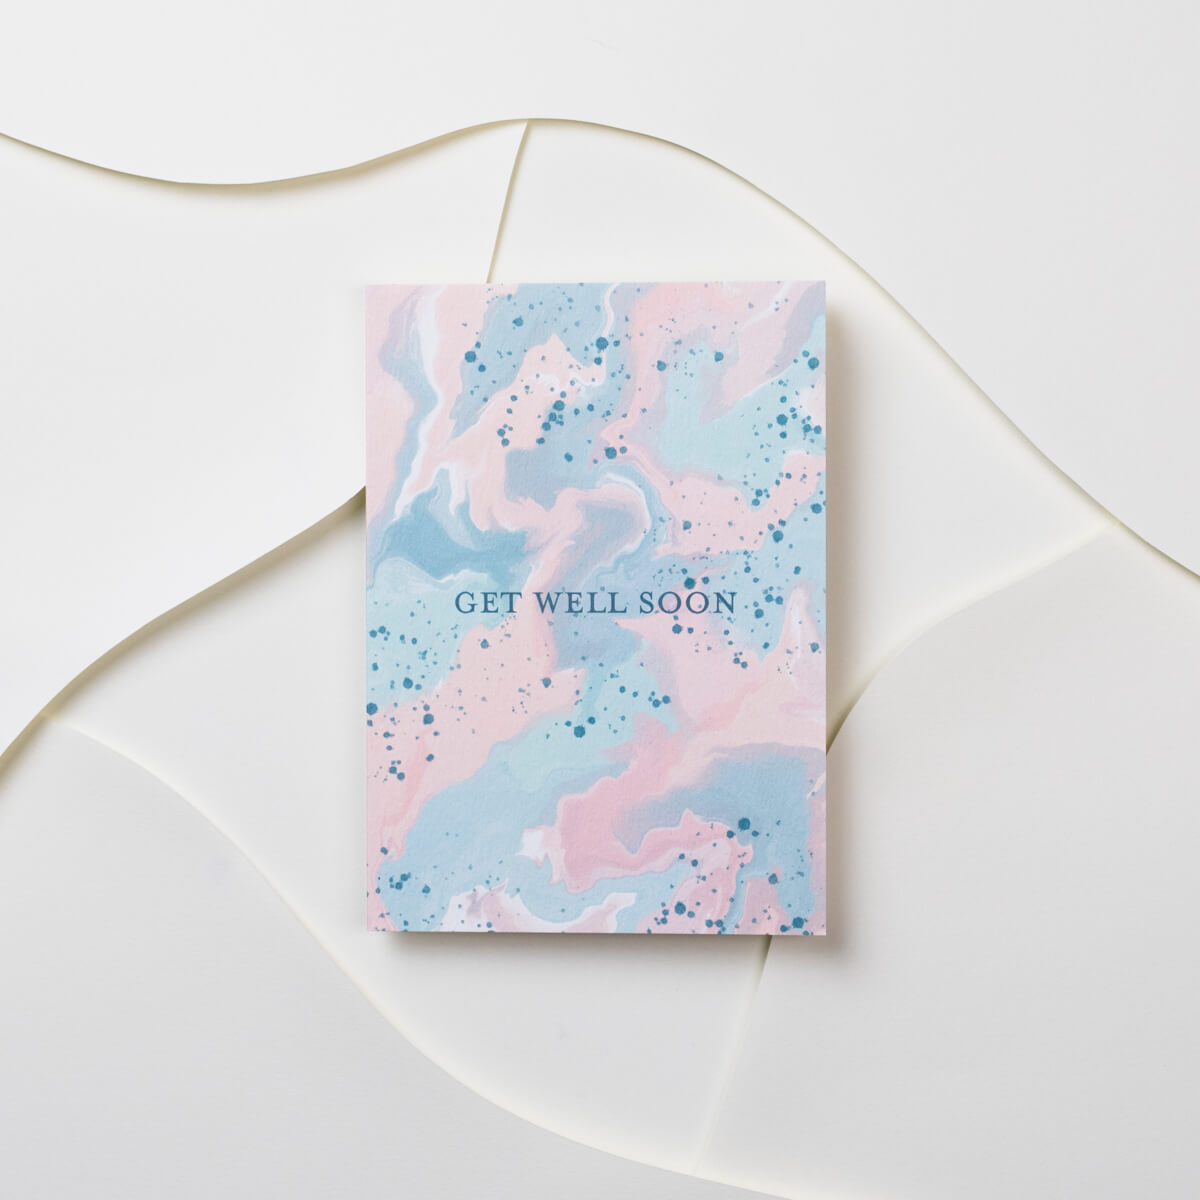 Get Well Soon Marble Card - The Design Palette